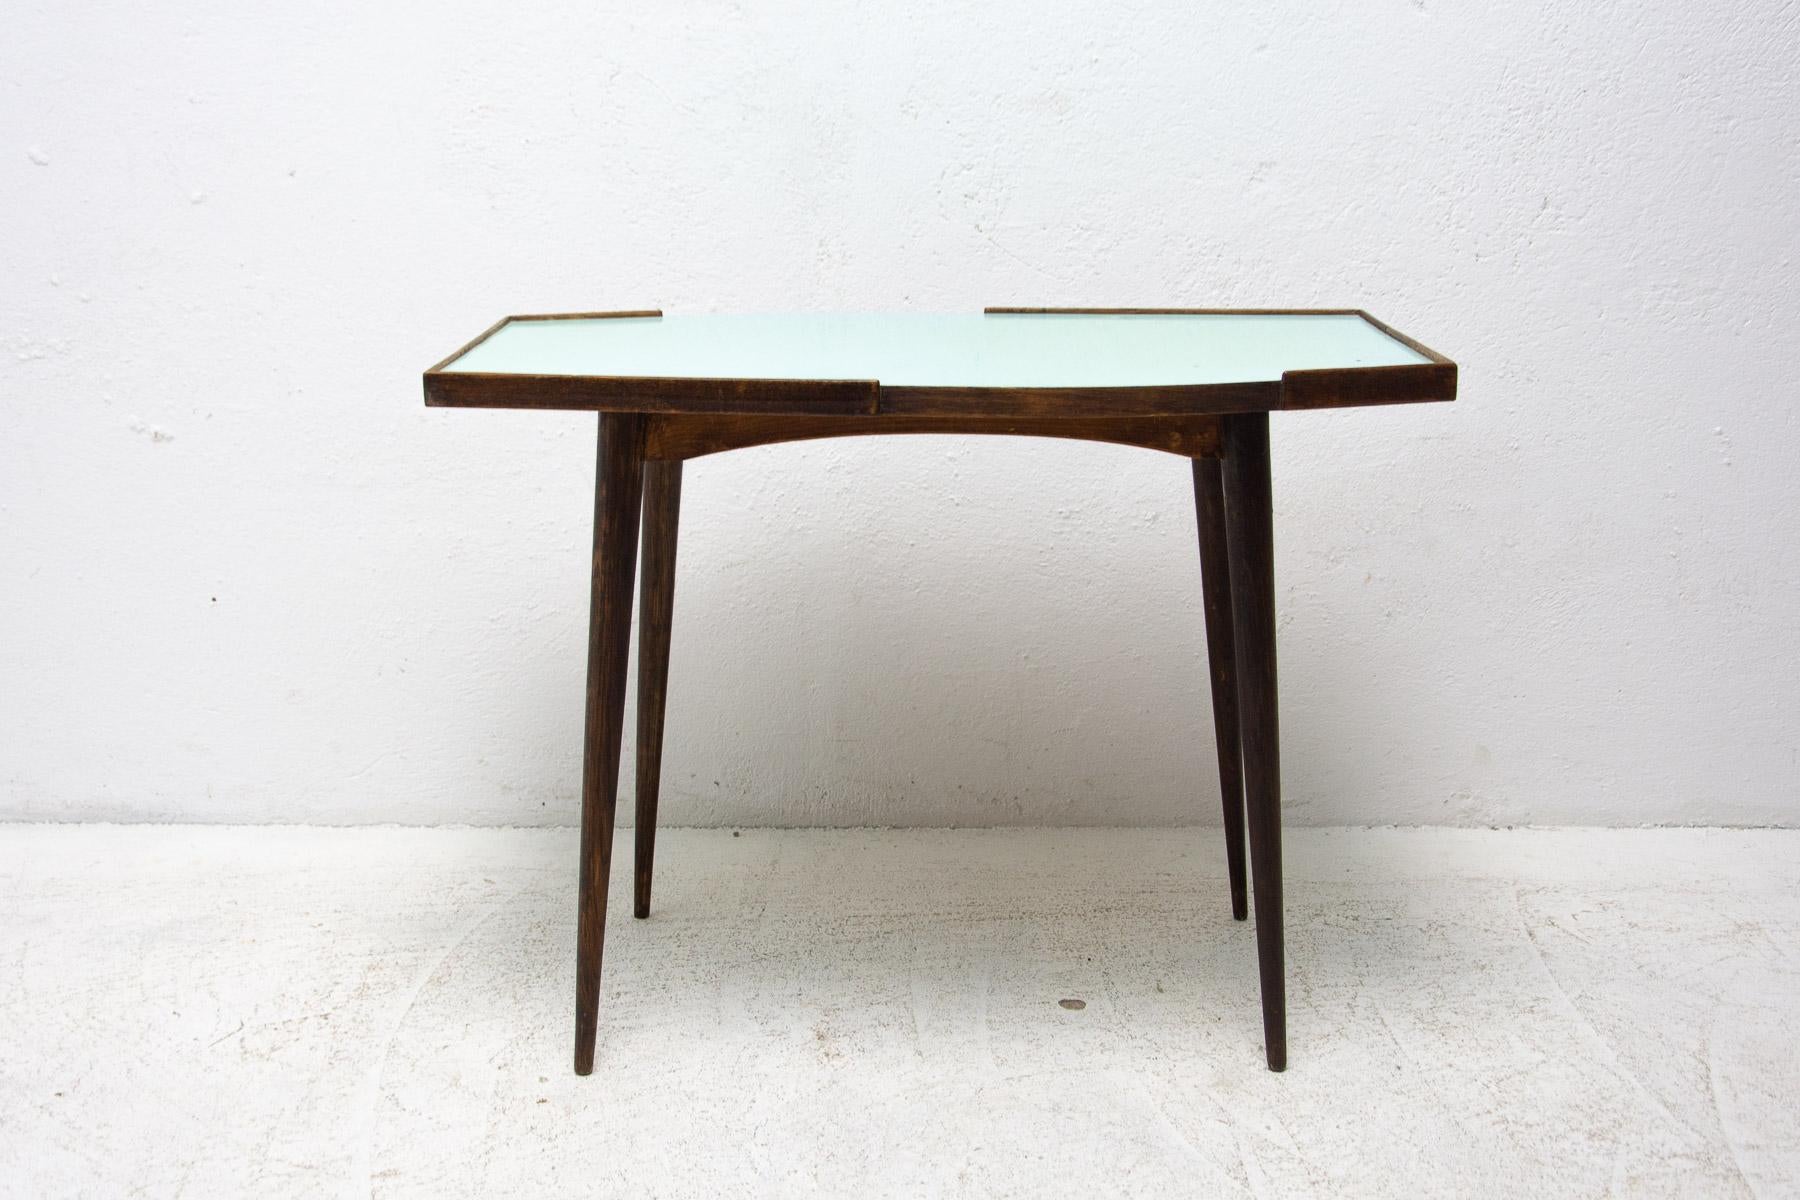 This mid century side table was made in the former Czechoslovakia in the 1950´s,

It´s made of dark stained beechwood and formica on the top. Interesting shaping.

In good Vintage condition, showing signs of age and using.

Measures: Height: 61